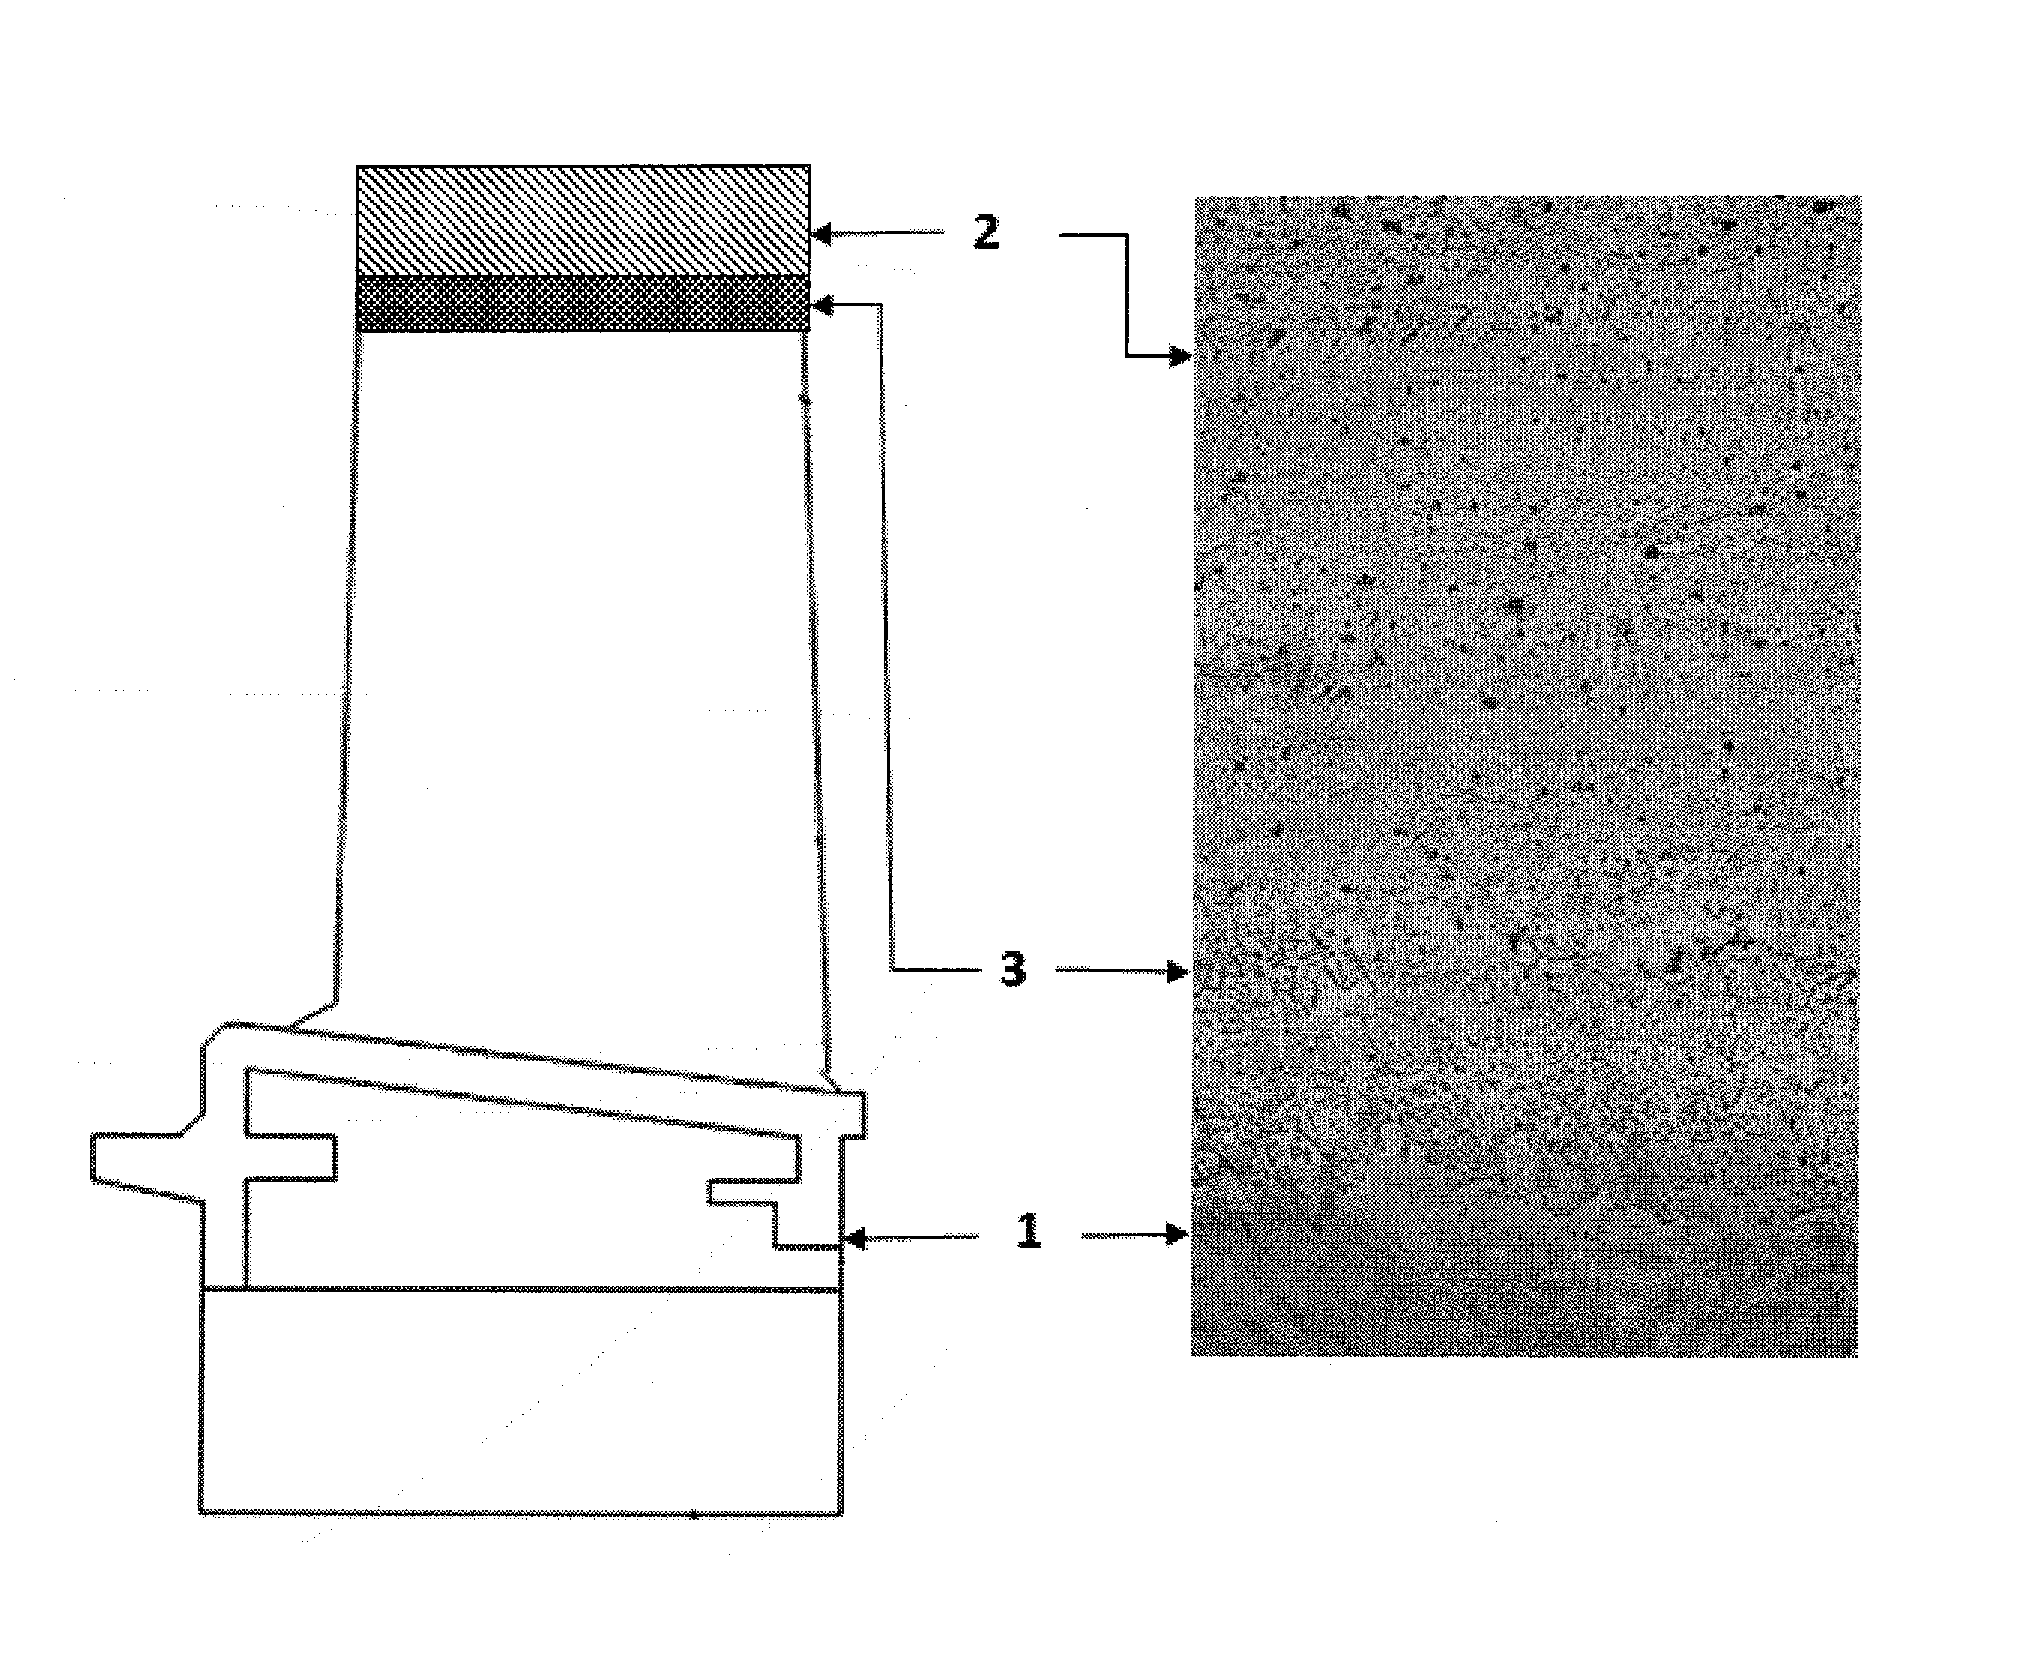 Method of cladding and fusion welding of superalloys